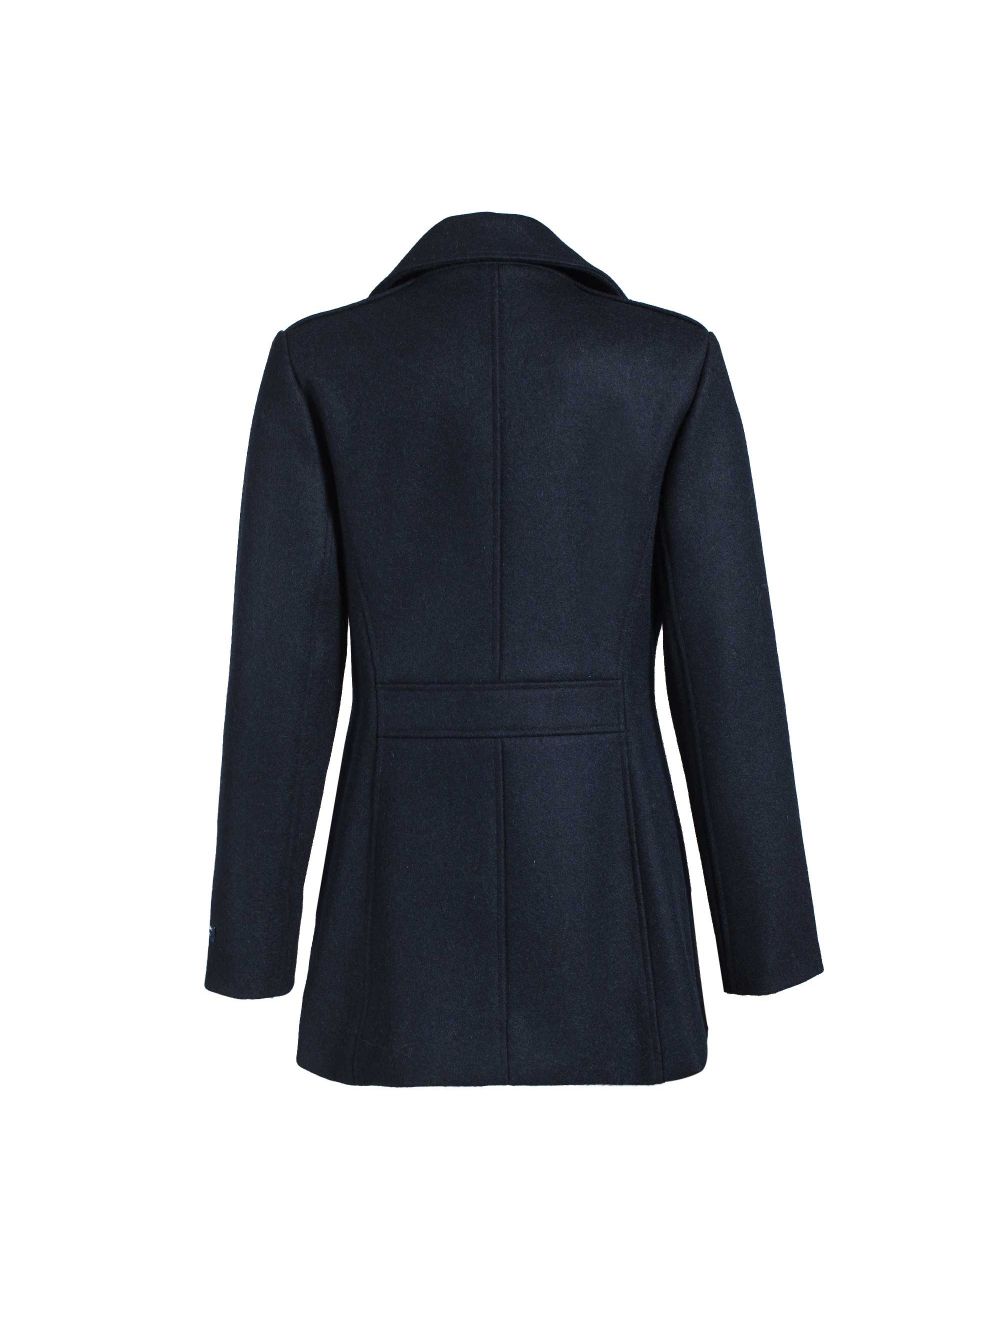 detroit-or-waisted-pea-coat-for-women-made-of-wool (1)